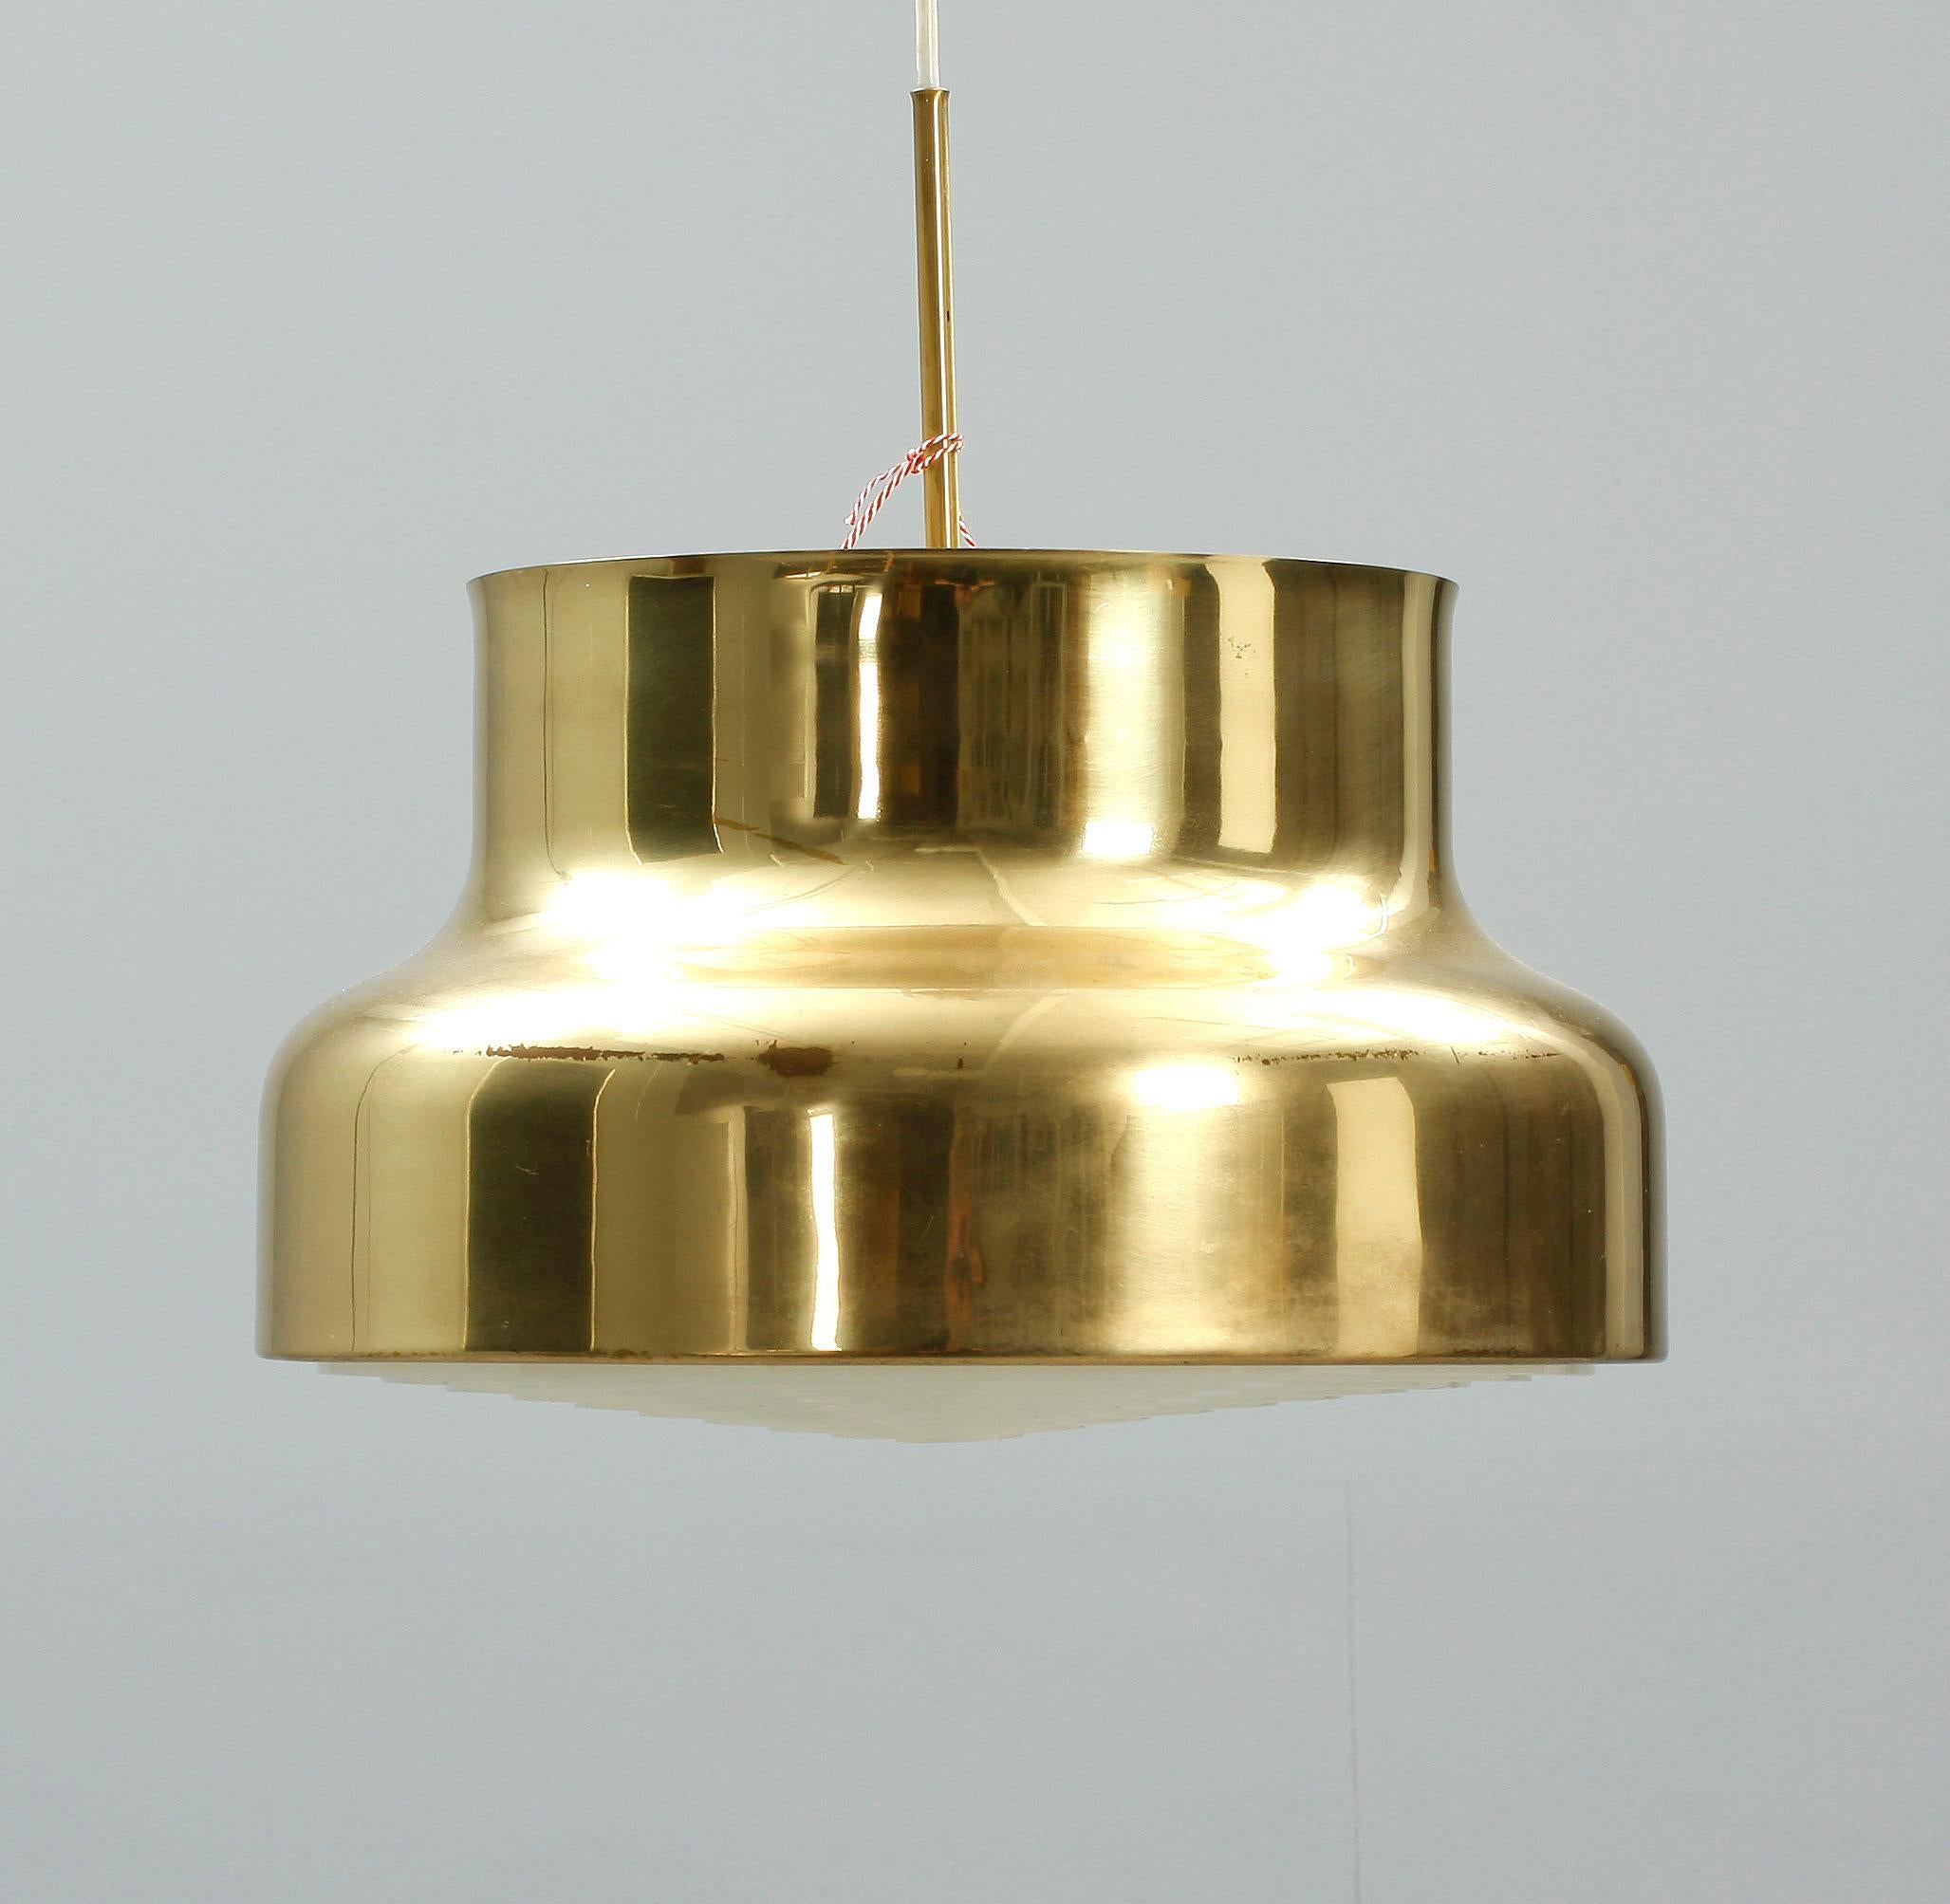 Brass Anders Pehrsson for Lyktan model 